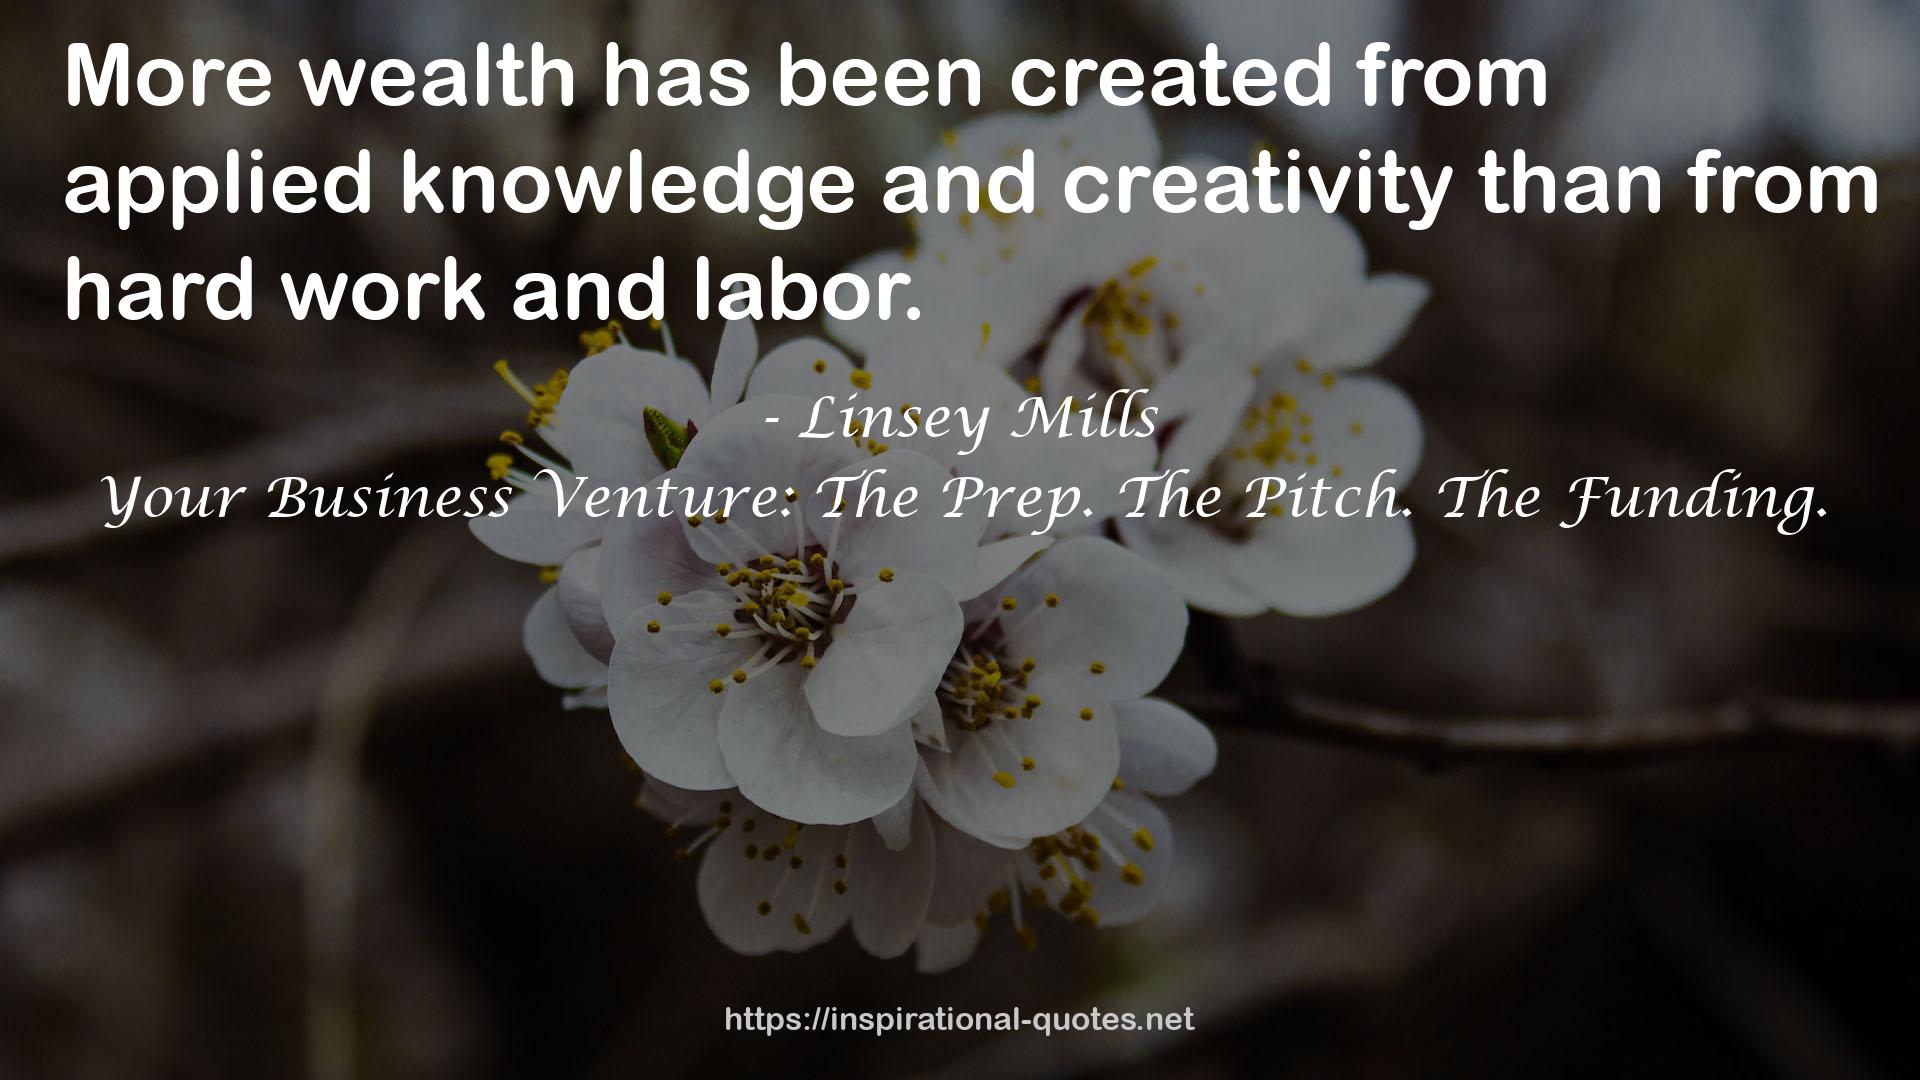 Linsey Mills QUOTES